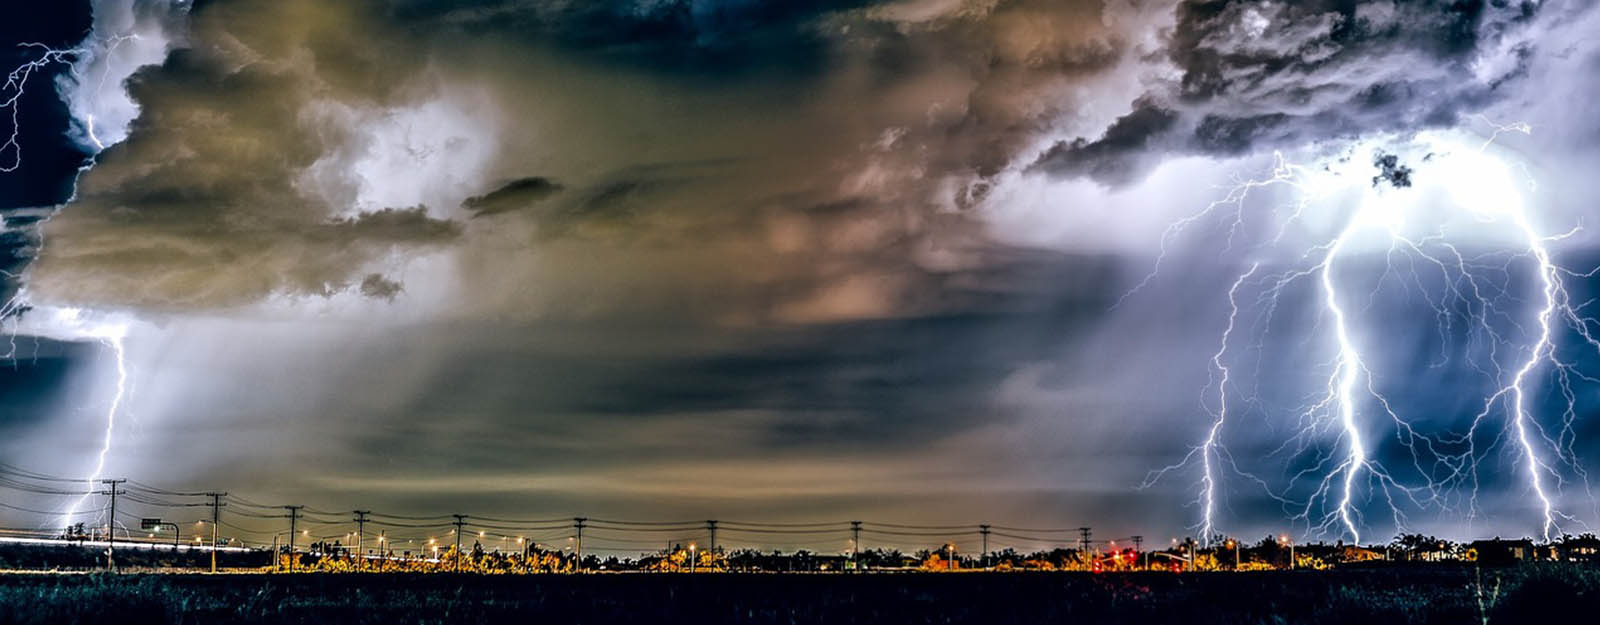 Photograph of a thunderstorm over a small town.